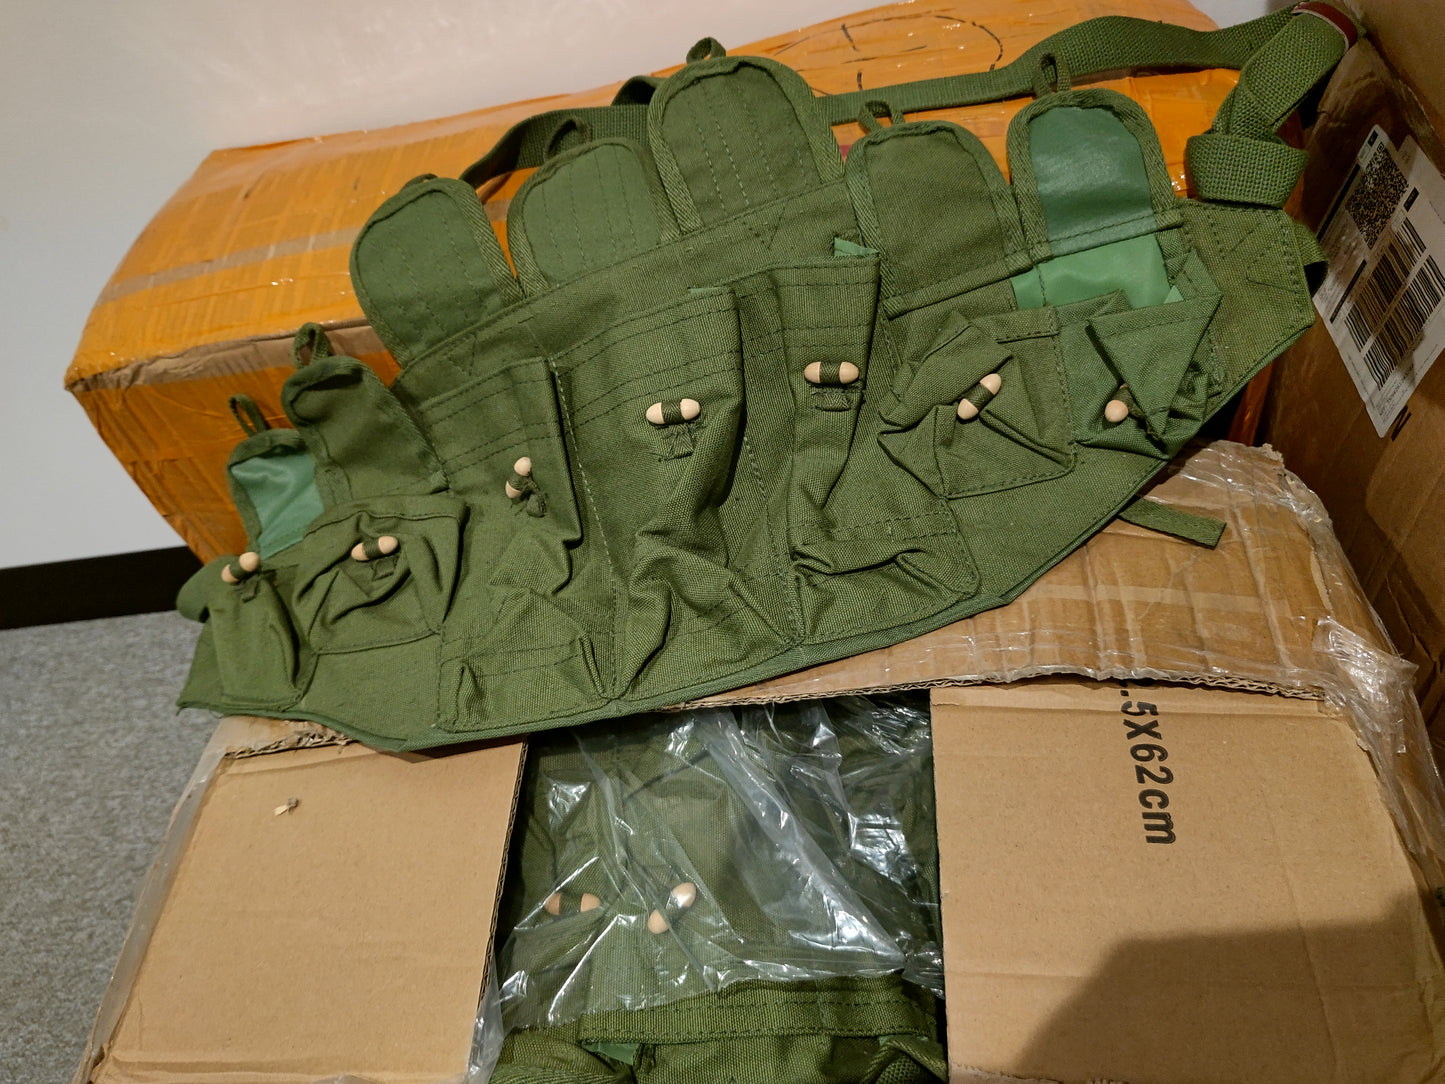 Type 56 Chicom Chest Rig - Free international Shipping - Best price guaranteed